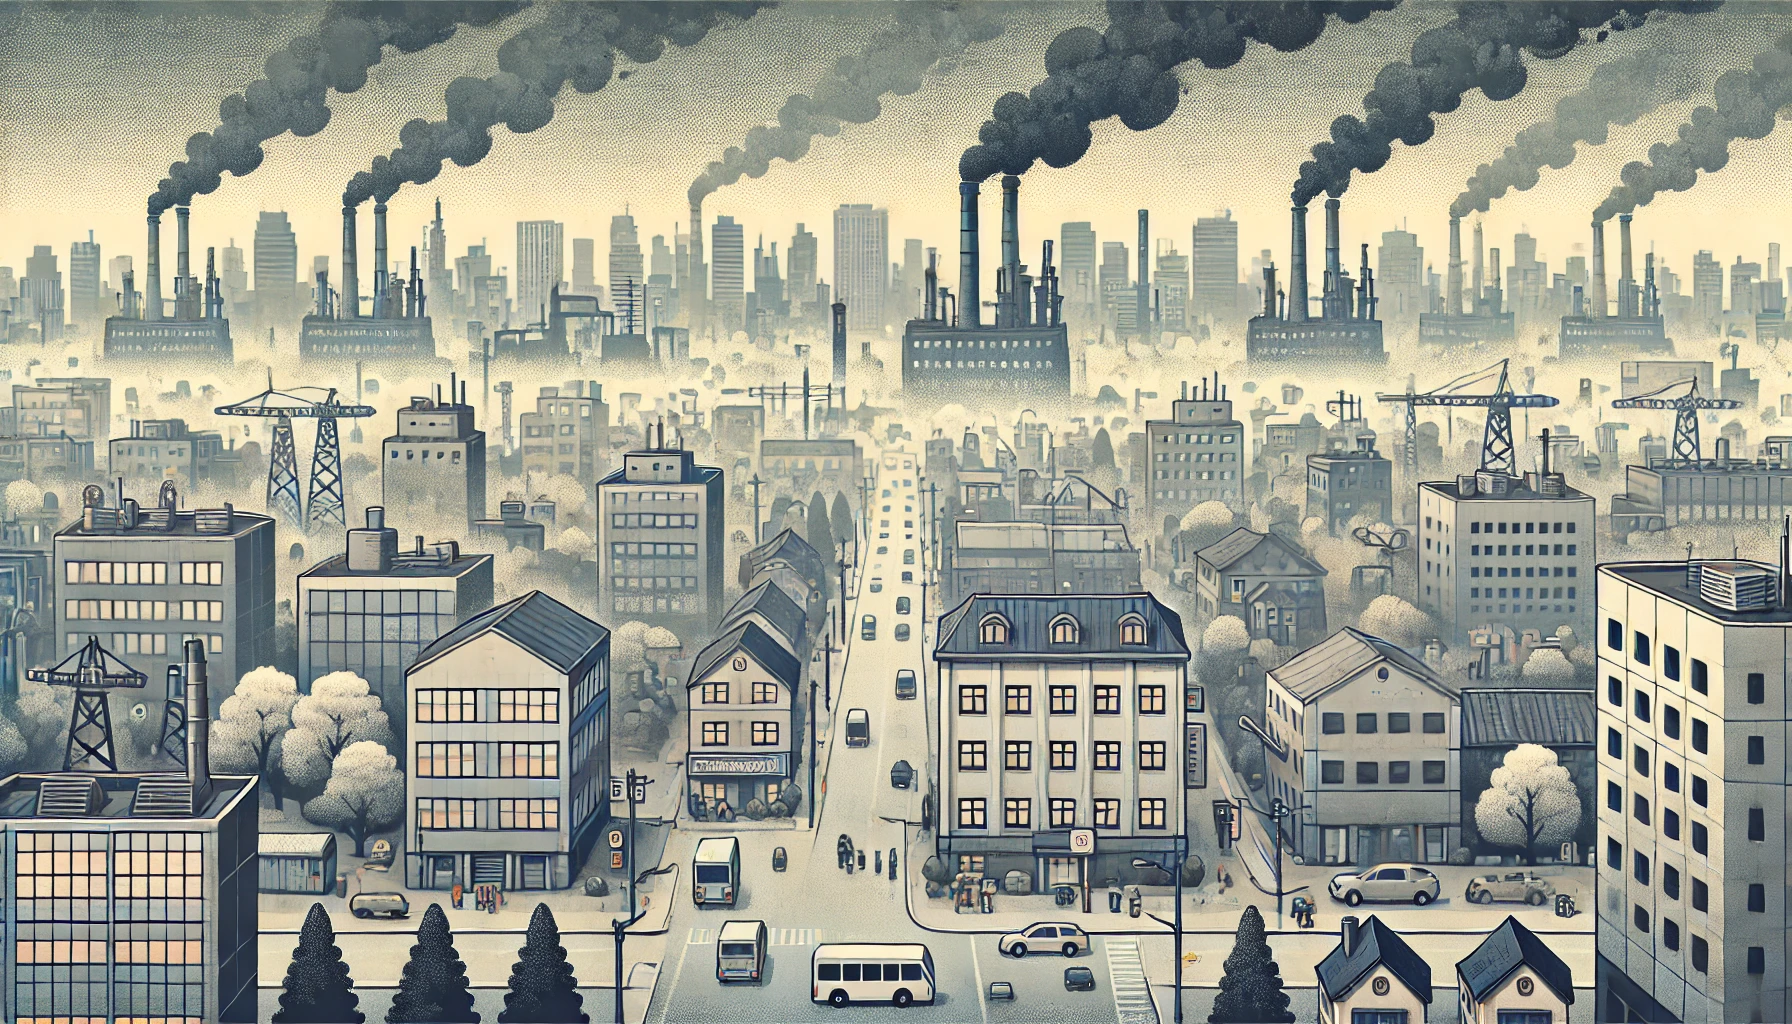 A wide, rectangular header image depicting a city with heavily polluted air. The sky is filled with thick smog, making it difficult to see the sun. Buildings and streets are covered in a layer of grime. People are wearing masks, and there are few trees, with those present looking unhealthy. Industrial chimneys in the background are emitting dark smoke, contributing to the overall sense of environmental degradation. The colors are muted and grey, reflecting the grim atmosphere.